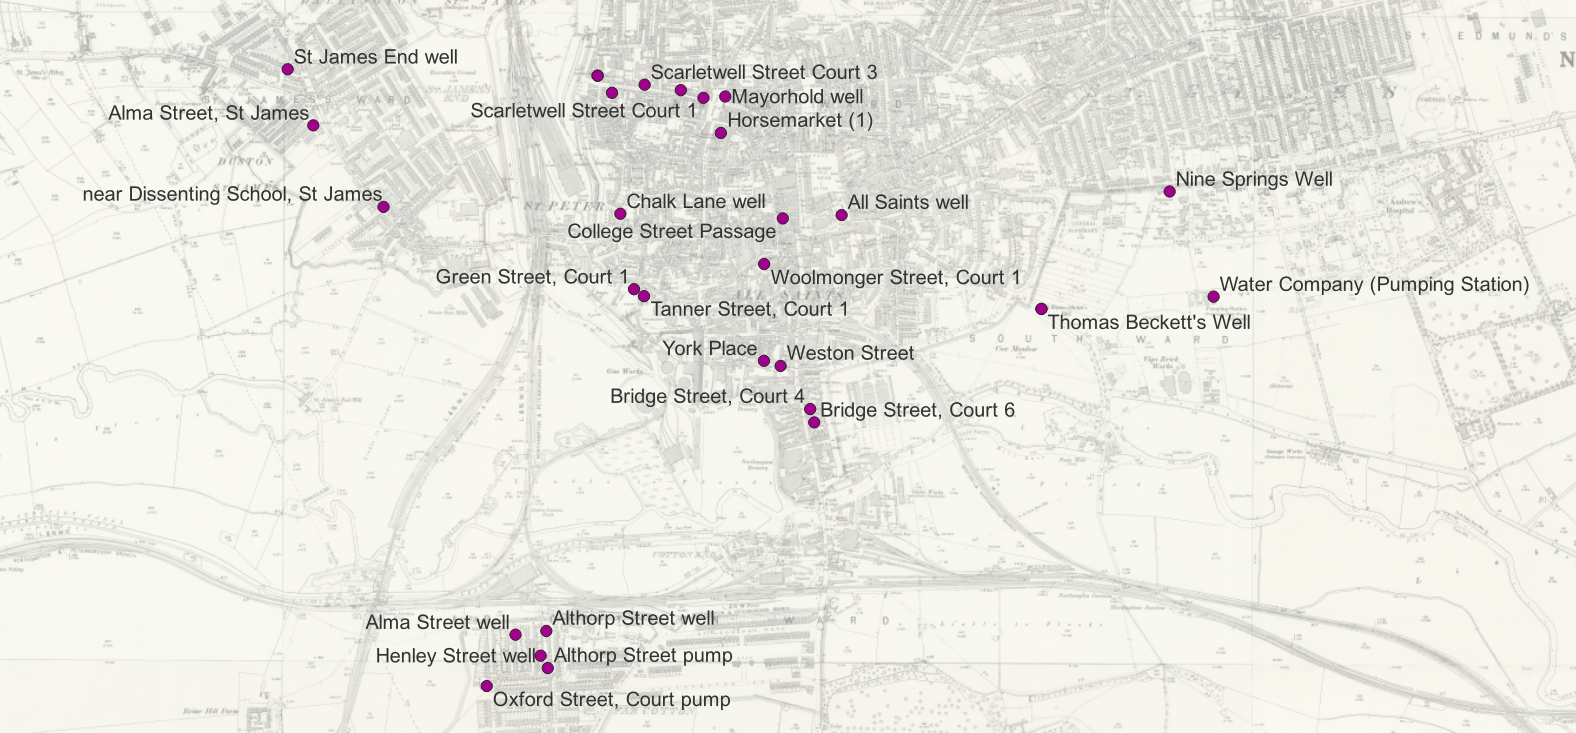 Location of wells and pumps mentioned in the text overlayed on a historic map of Northampton circa 1885